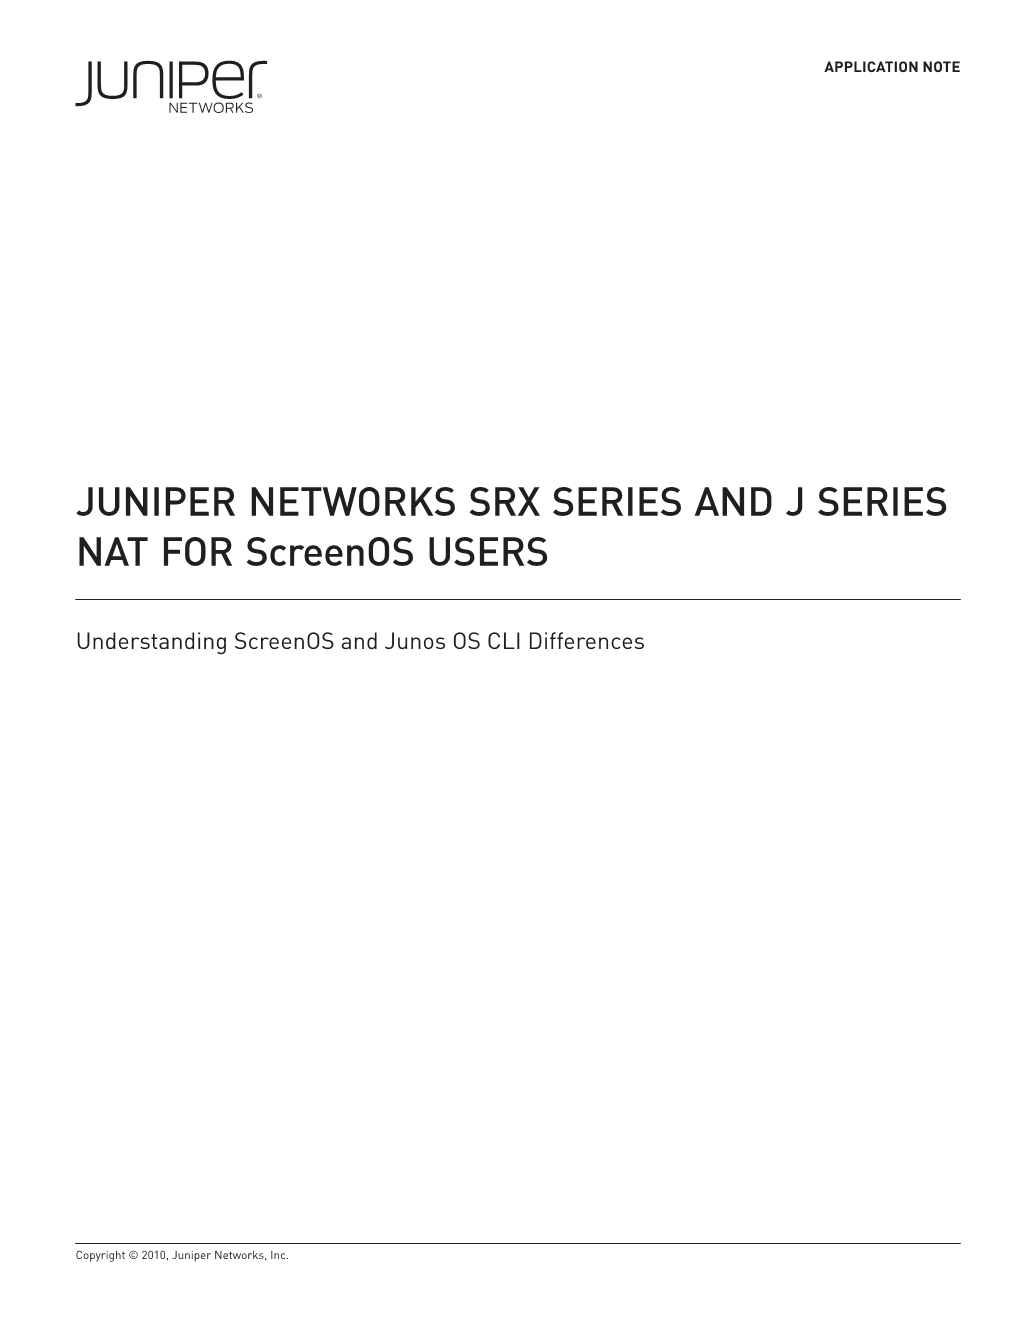 JUNIPER NETWORKS SRX SERIES and J SERIES NAT for Screenos USERS